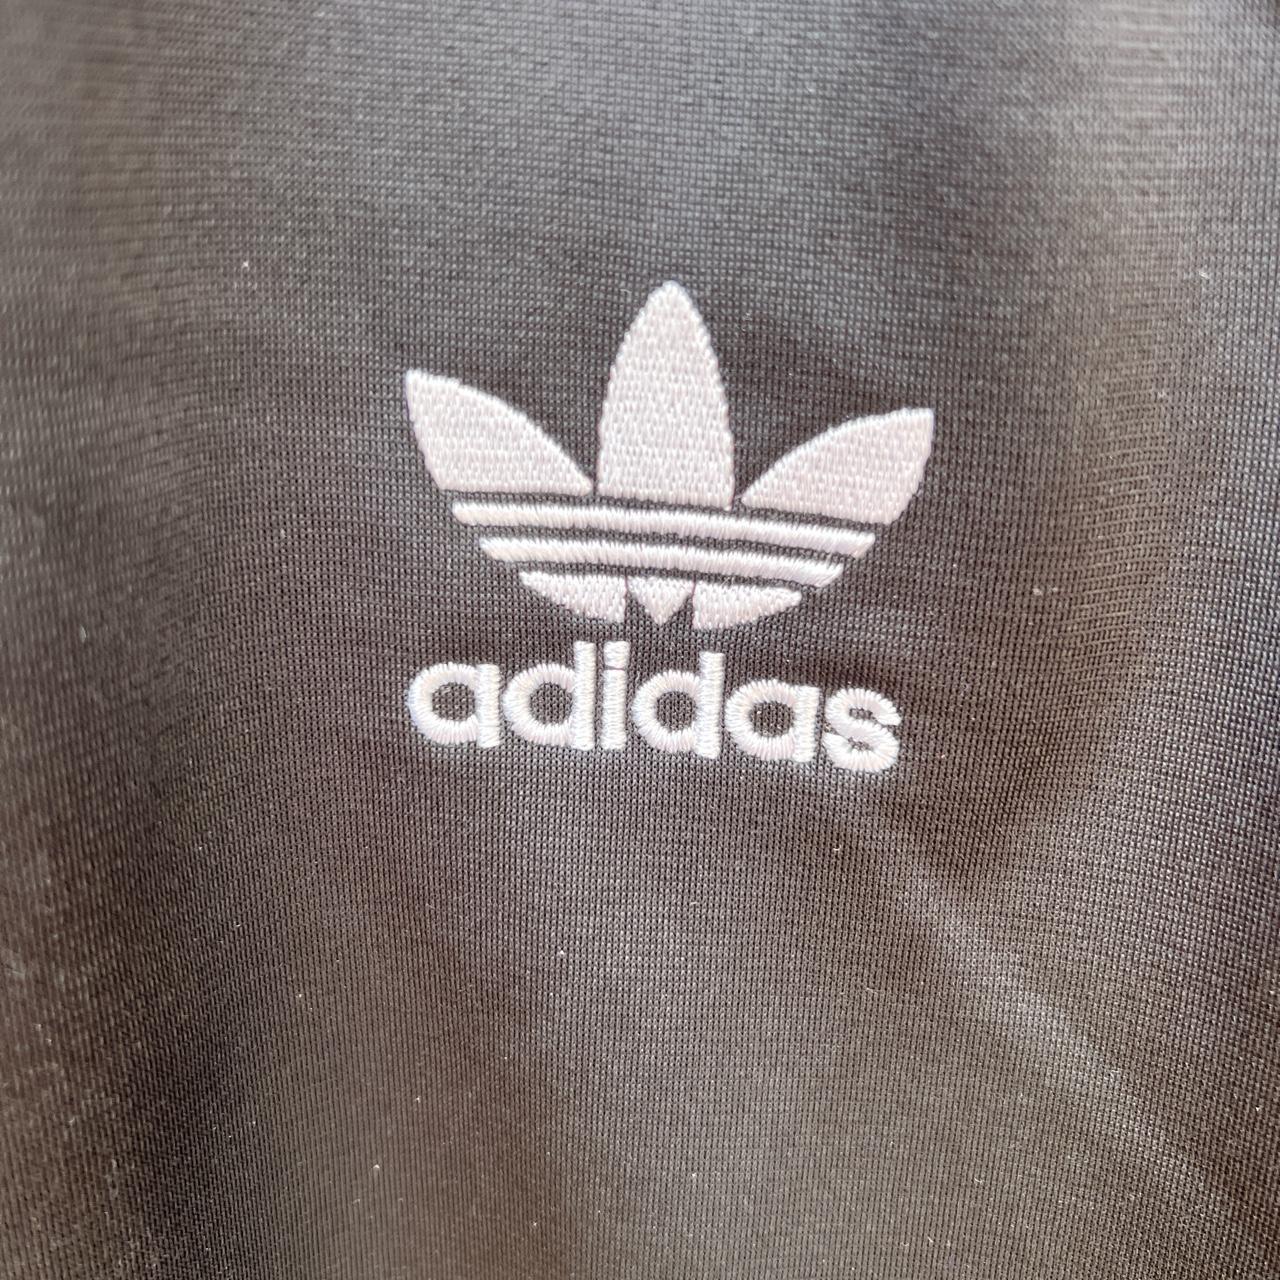 Adidas SST Tracksuit (Top only, bottoms separate but... - Depop